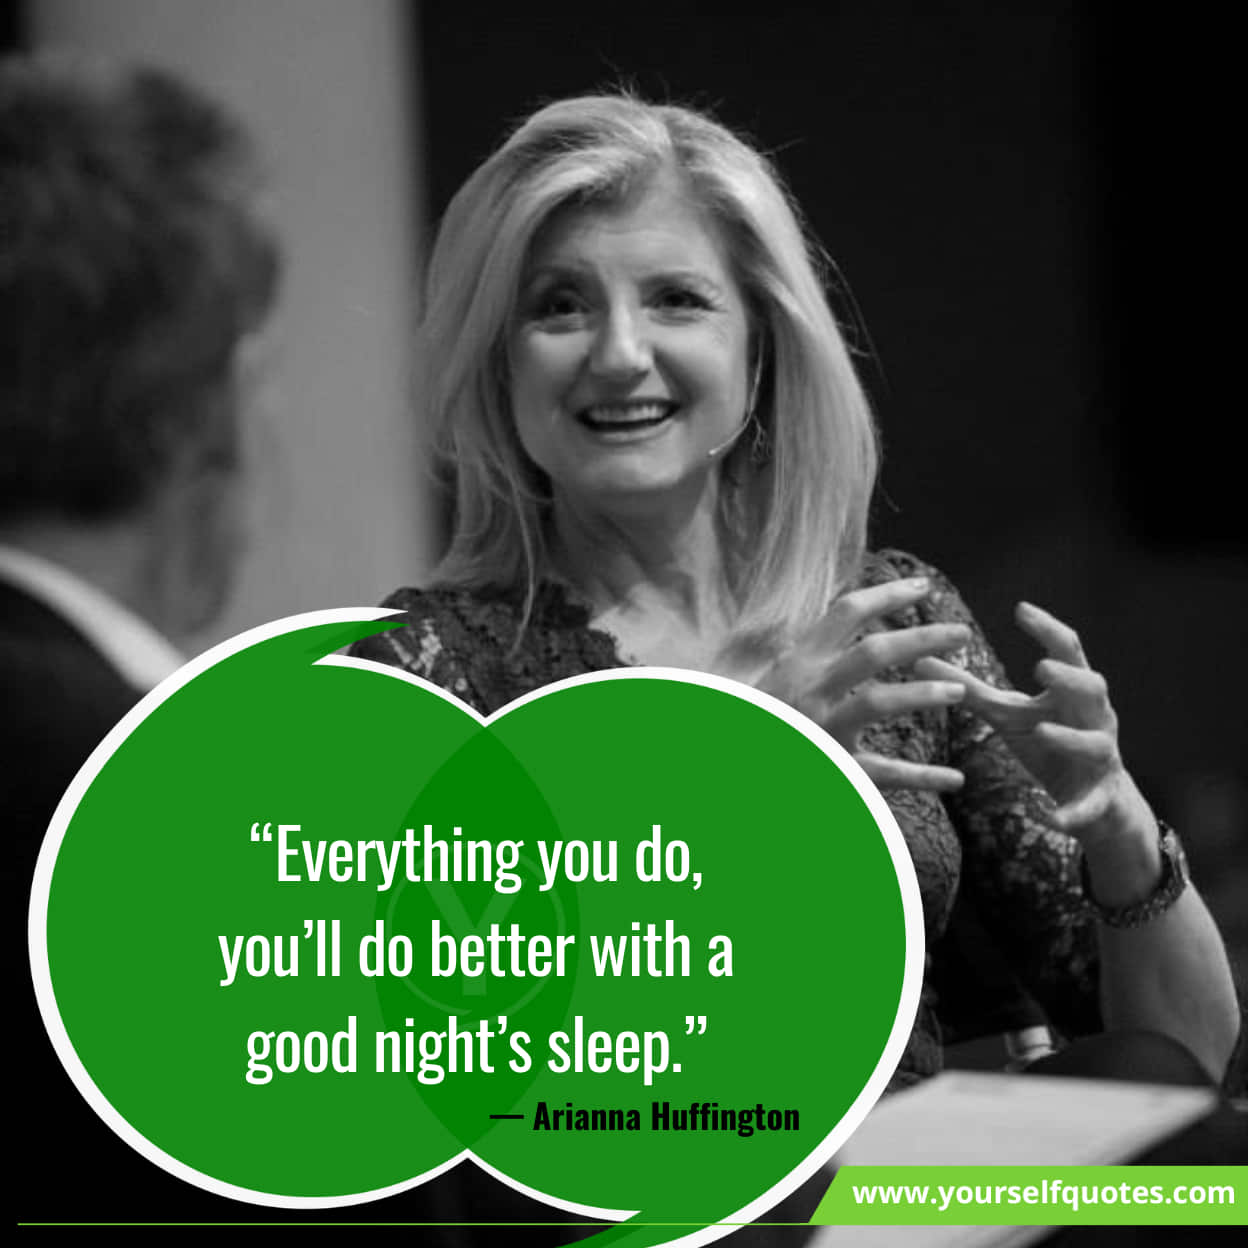 Arianna Huffington quotes on well-being and self-care